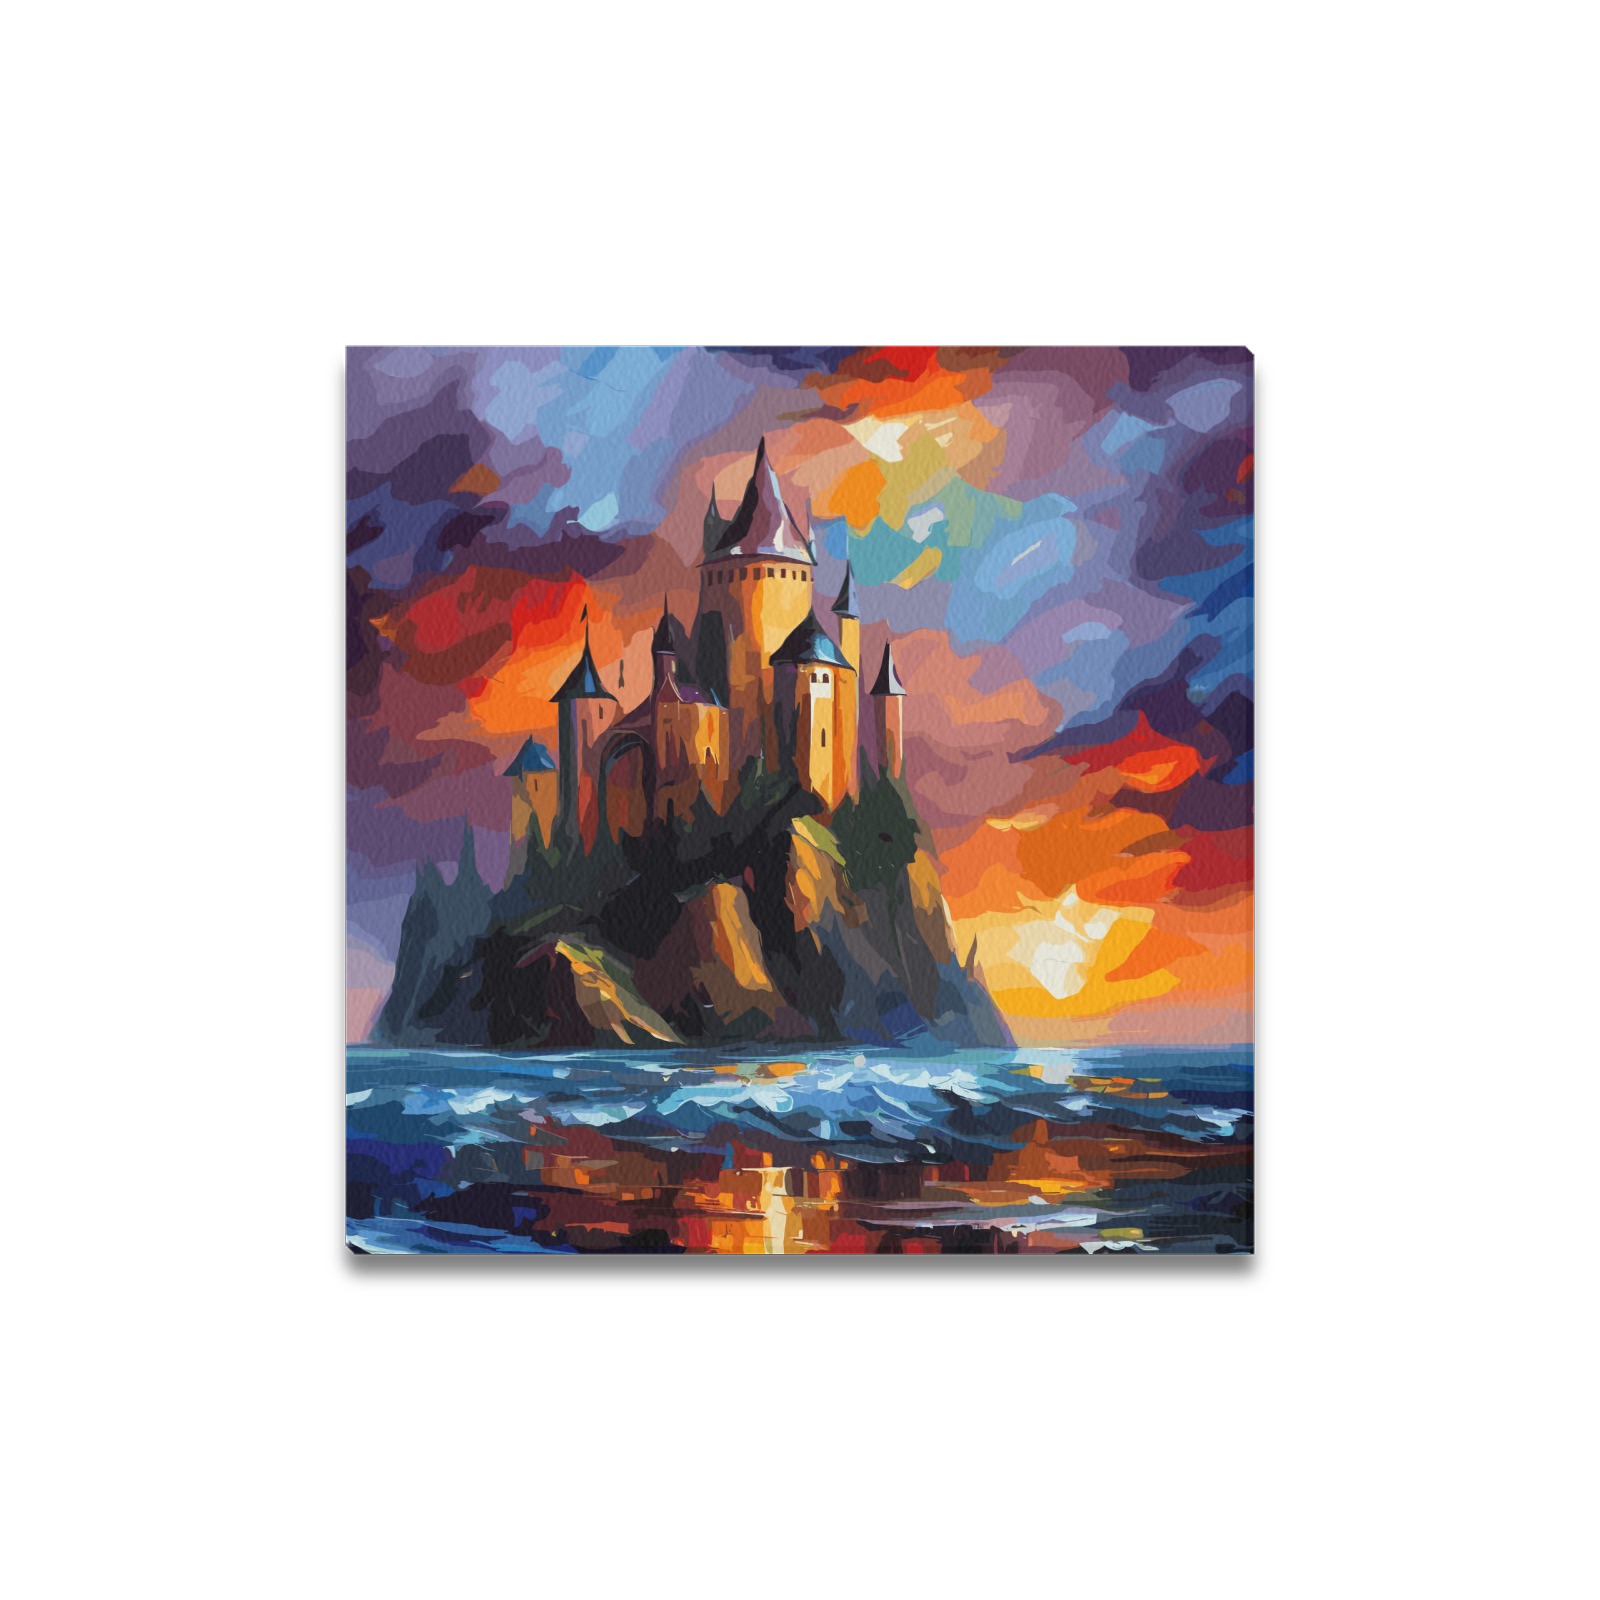 Cool fantasy castle on an island. Ocean sunset. Upgraded Canvas Print 16"x16"